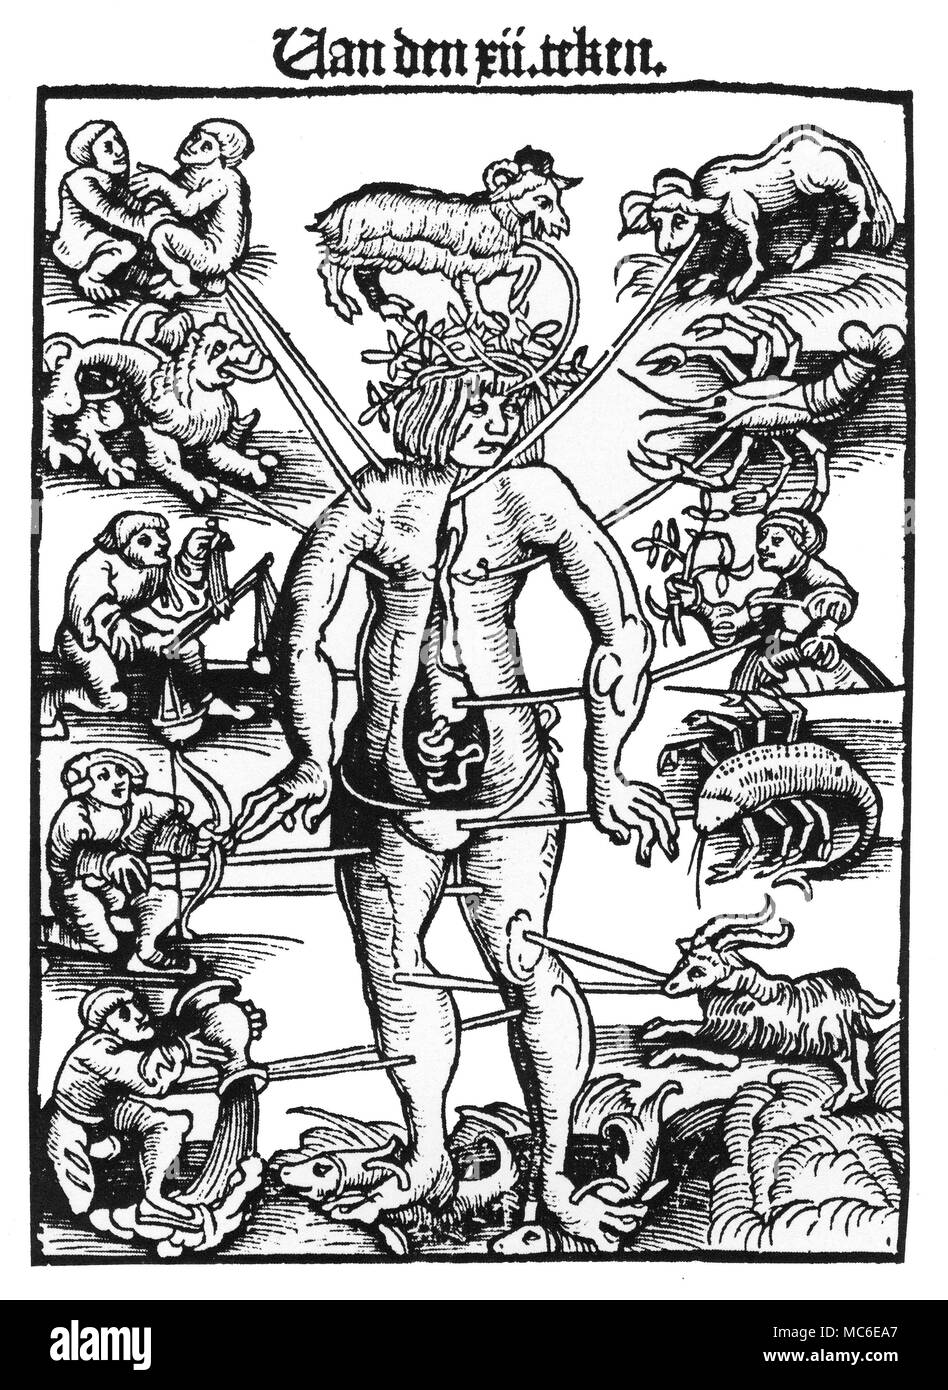 ASTROLOGY - ZODIACAL MAN The melothesic, or so-called zodiacal man, with the twelve images of the zodiac related to external and internal parts of the body. From the 1532 edition of Der Schapherders Kalender. Stock Photo